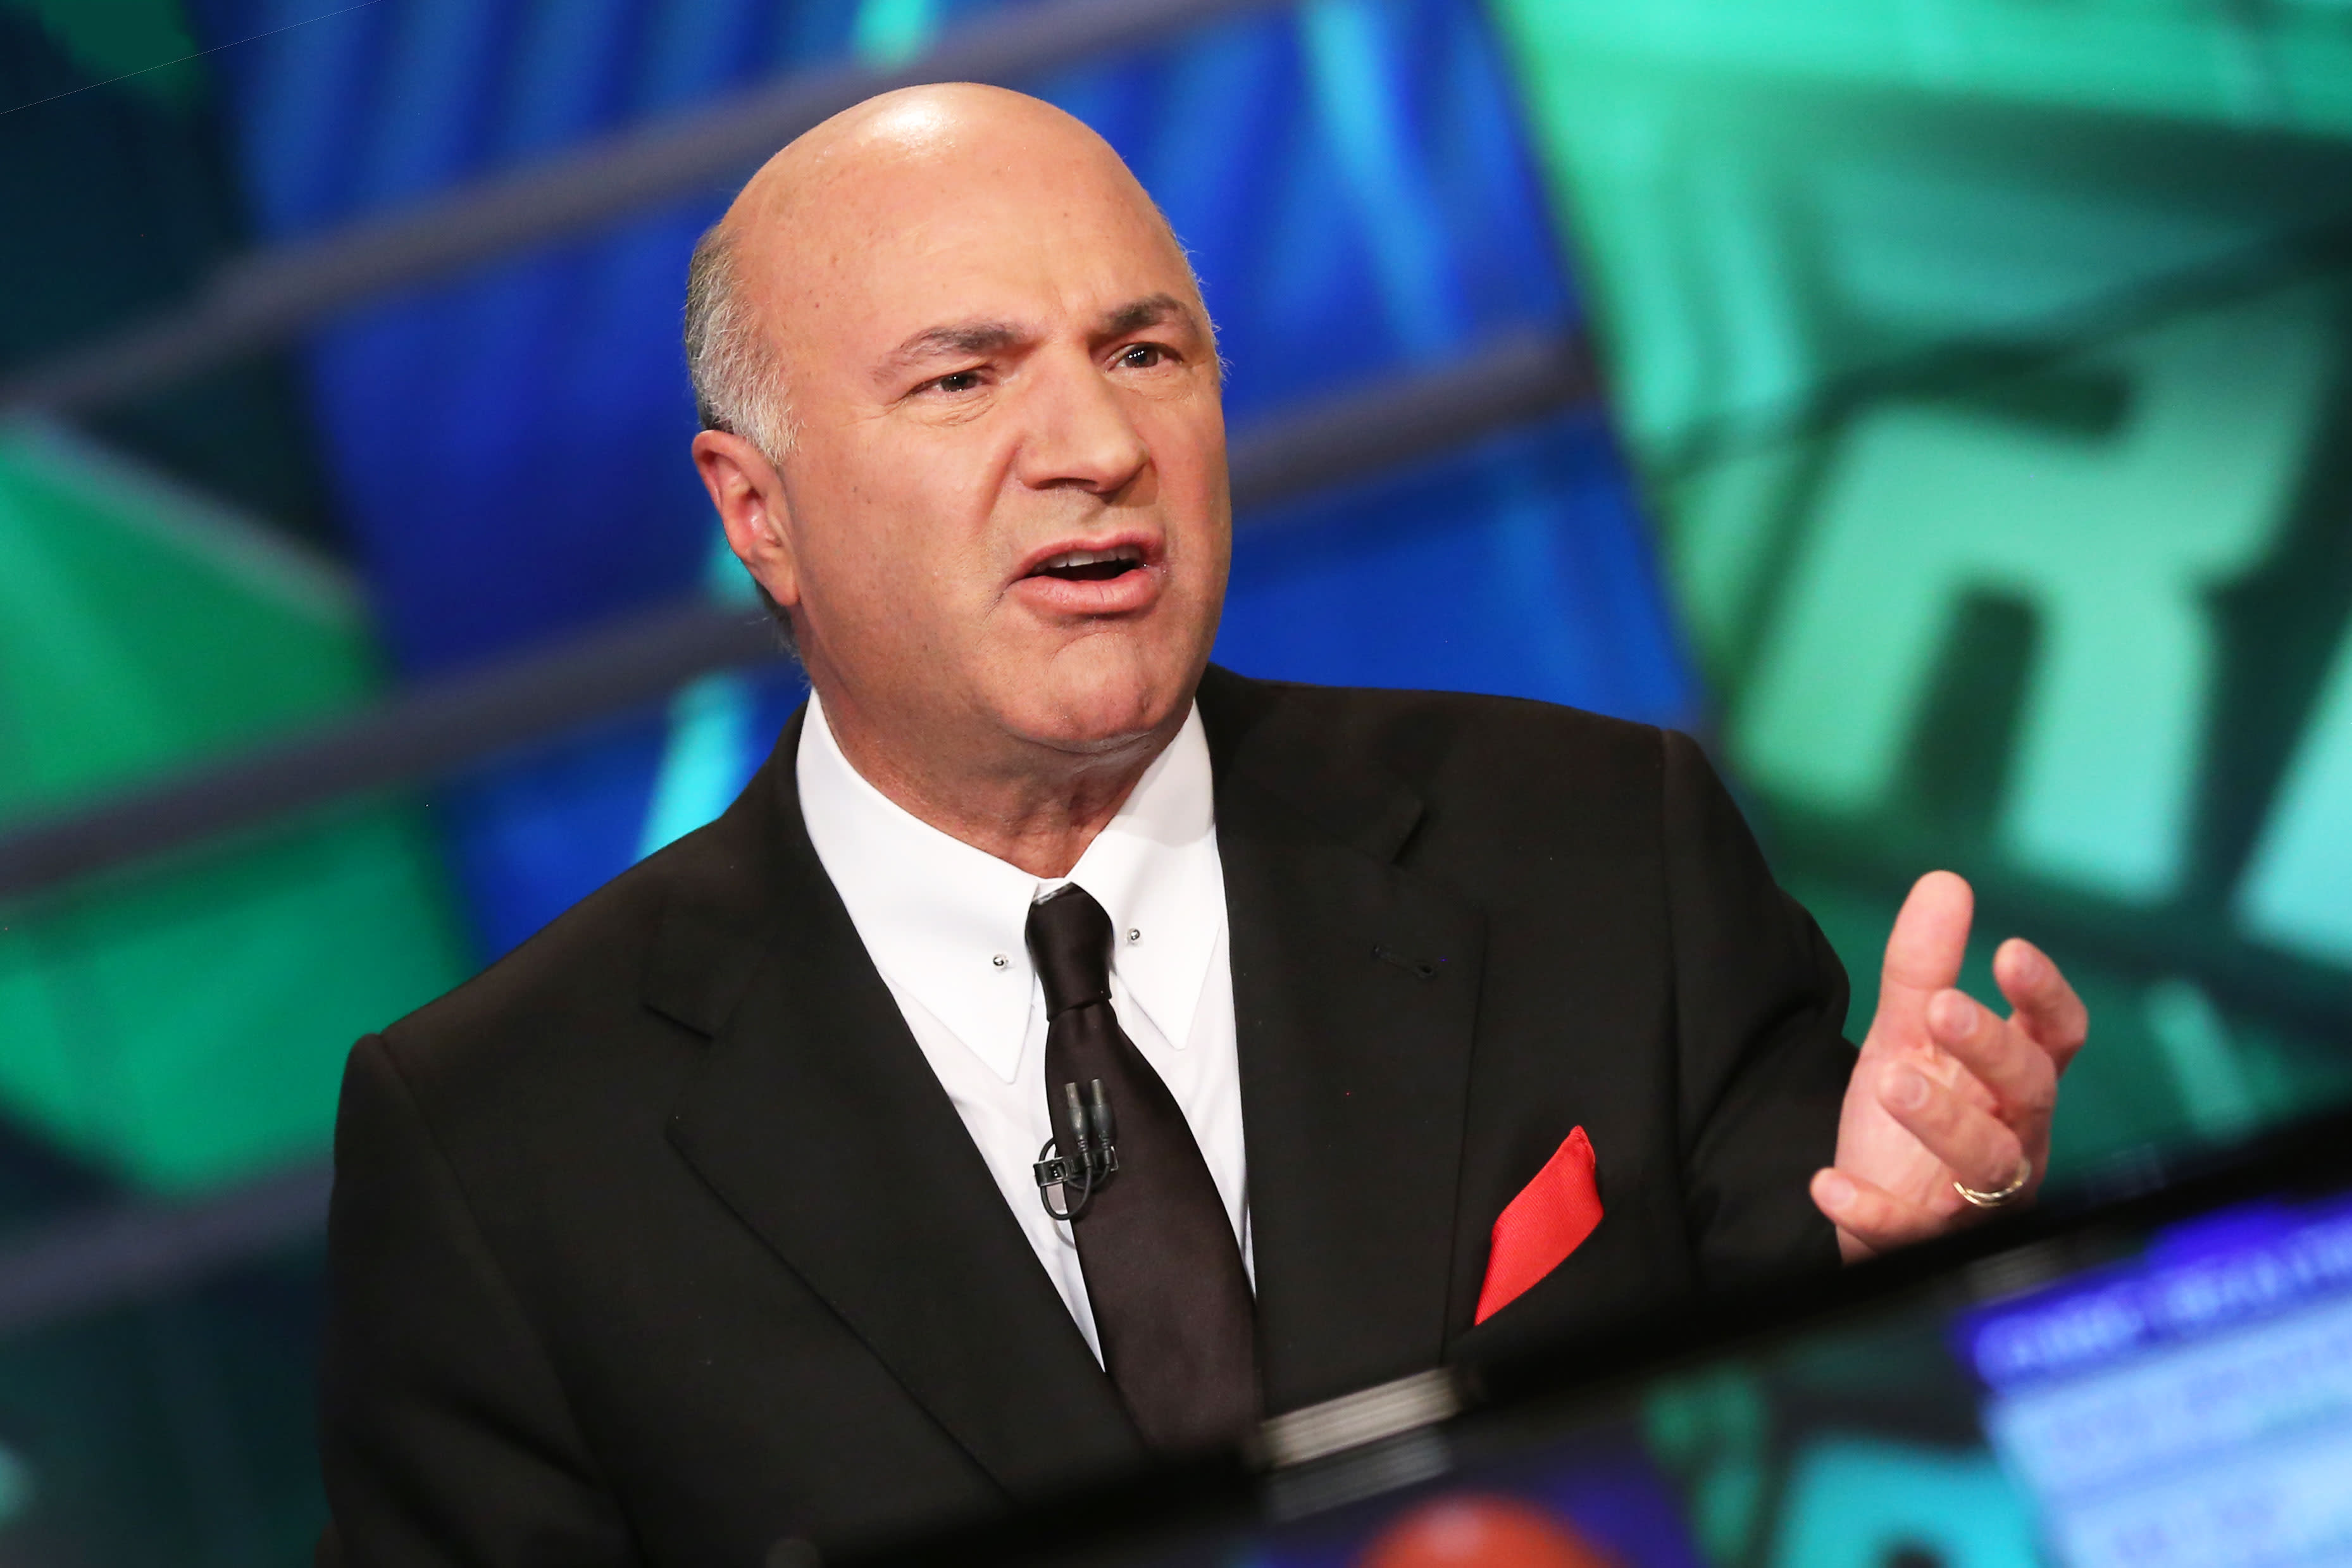 Kevin O’Leary says the US should level the playing field with China